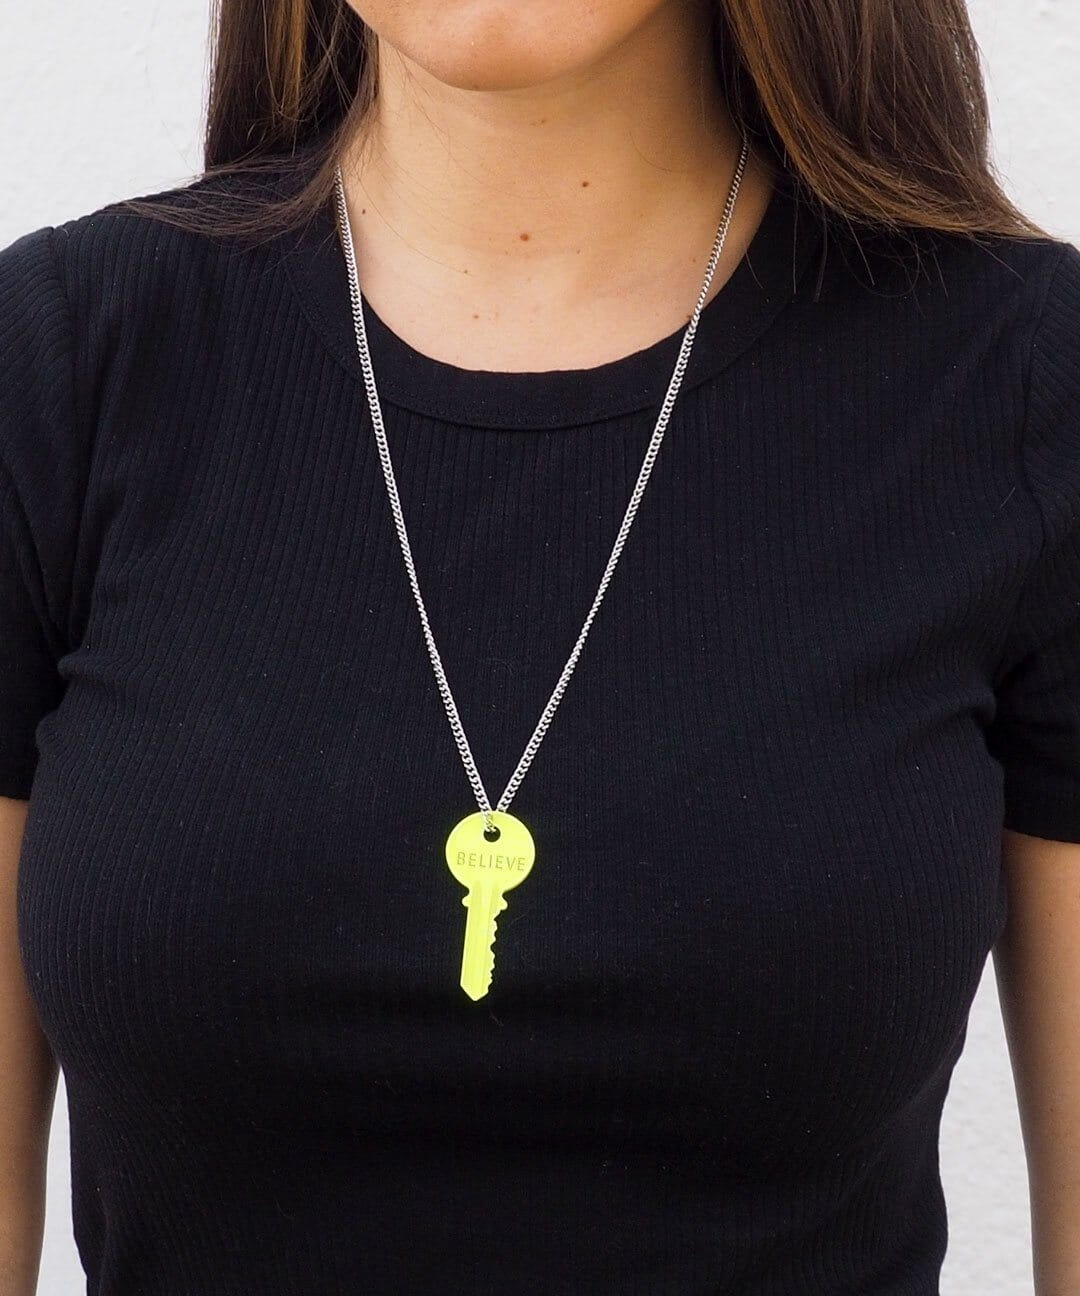 Neon Green Classic Ball Chain Key Necklace, Silver